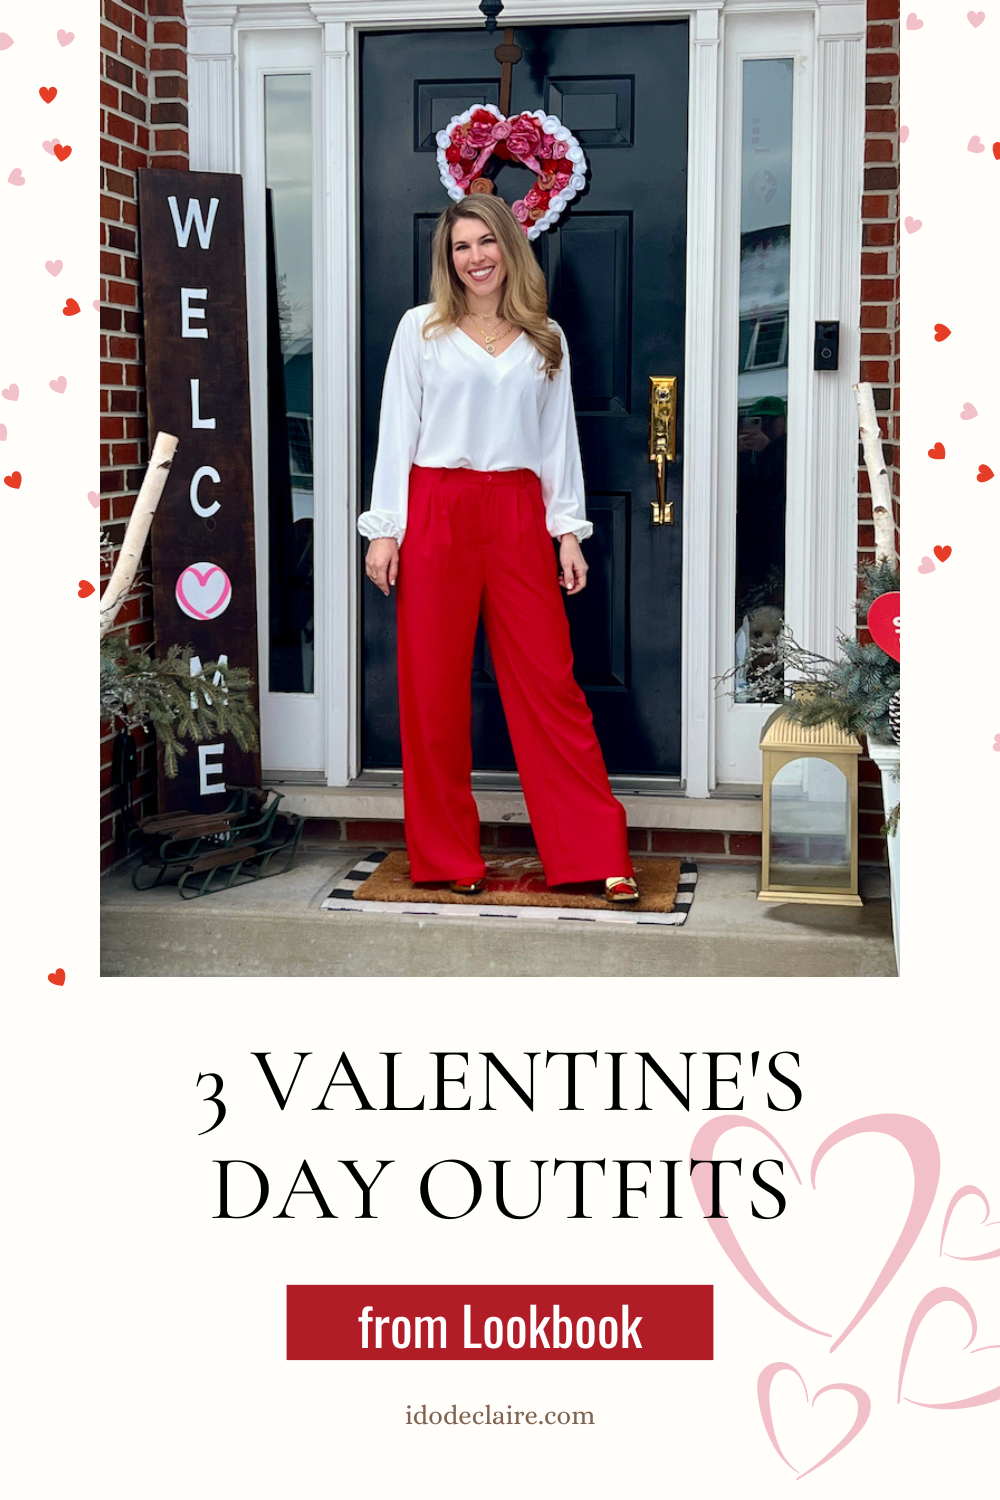 3 Valentine's Day Outfits from Lookbook